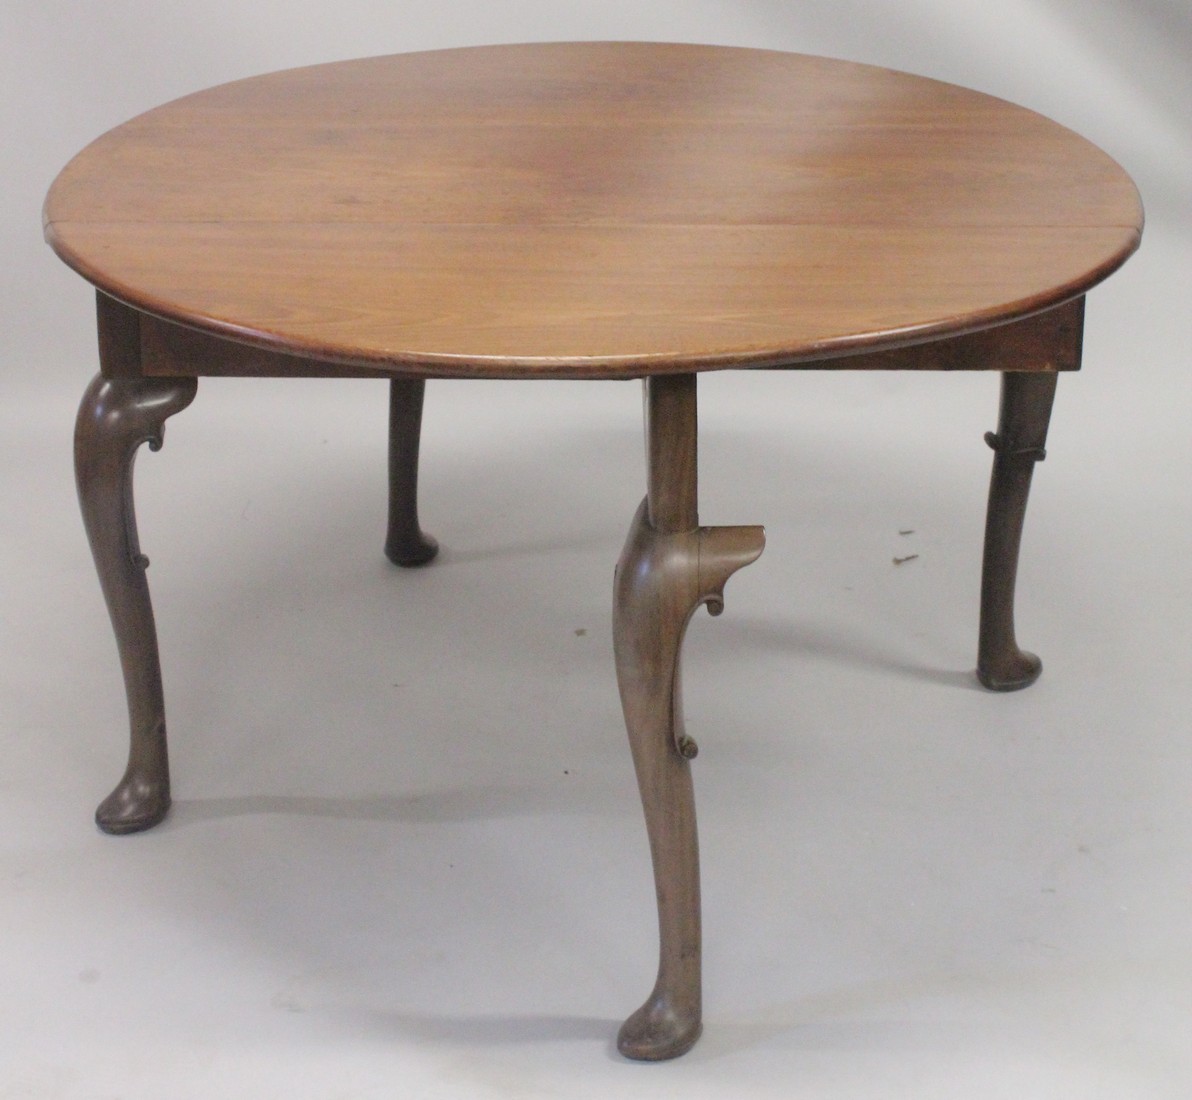 A GOOD GEORGE III MAHOGANY OVAL DROP FLAP DINING TABLE with gate leg action, on cabriole legs ending - Image 2 of 4